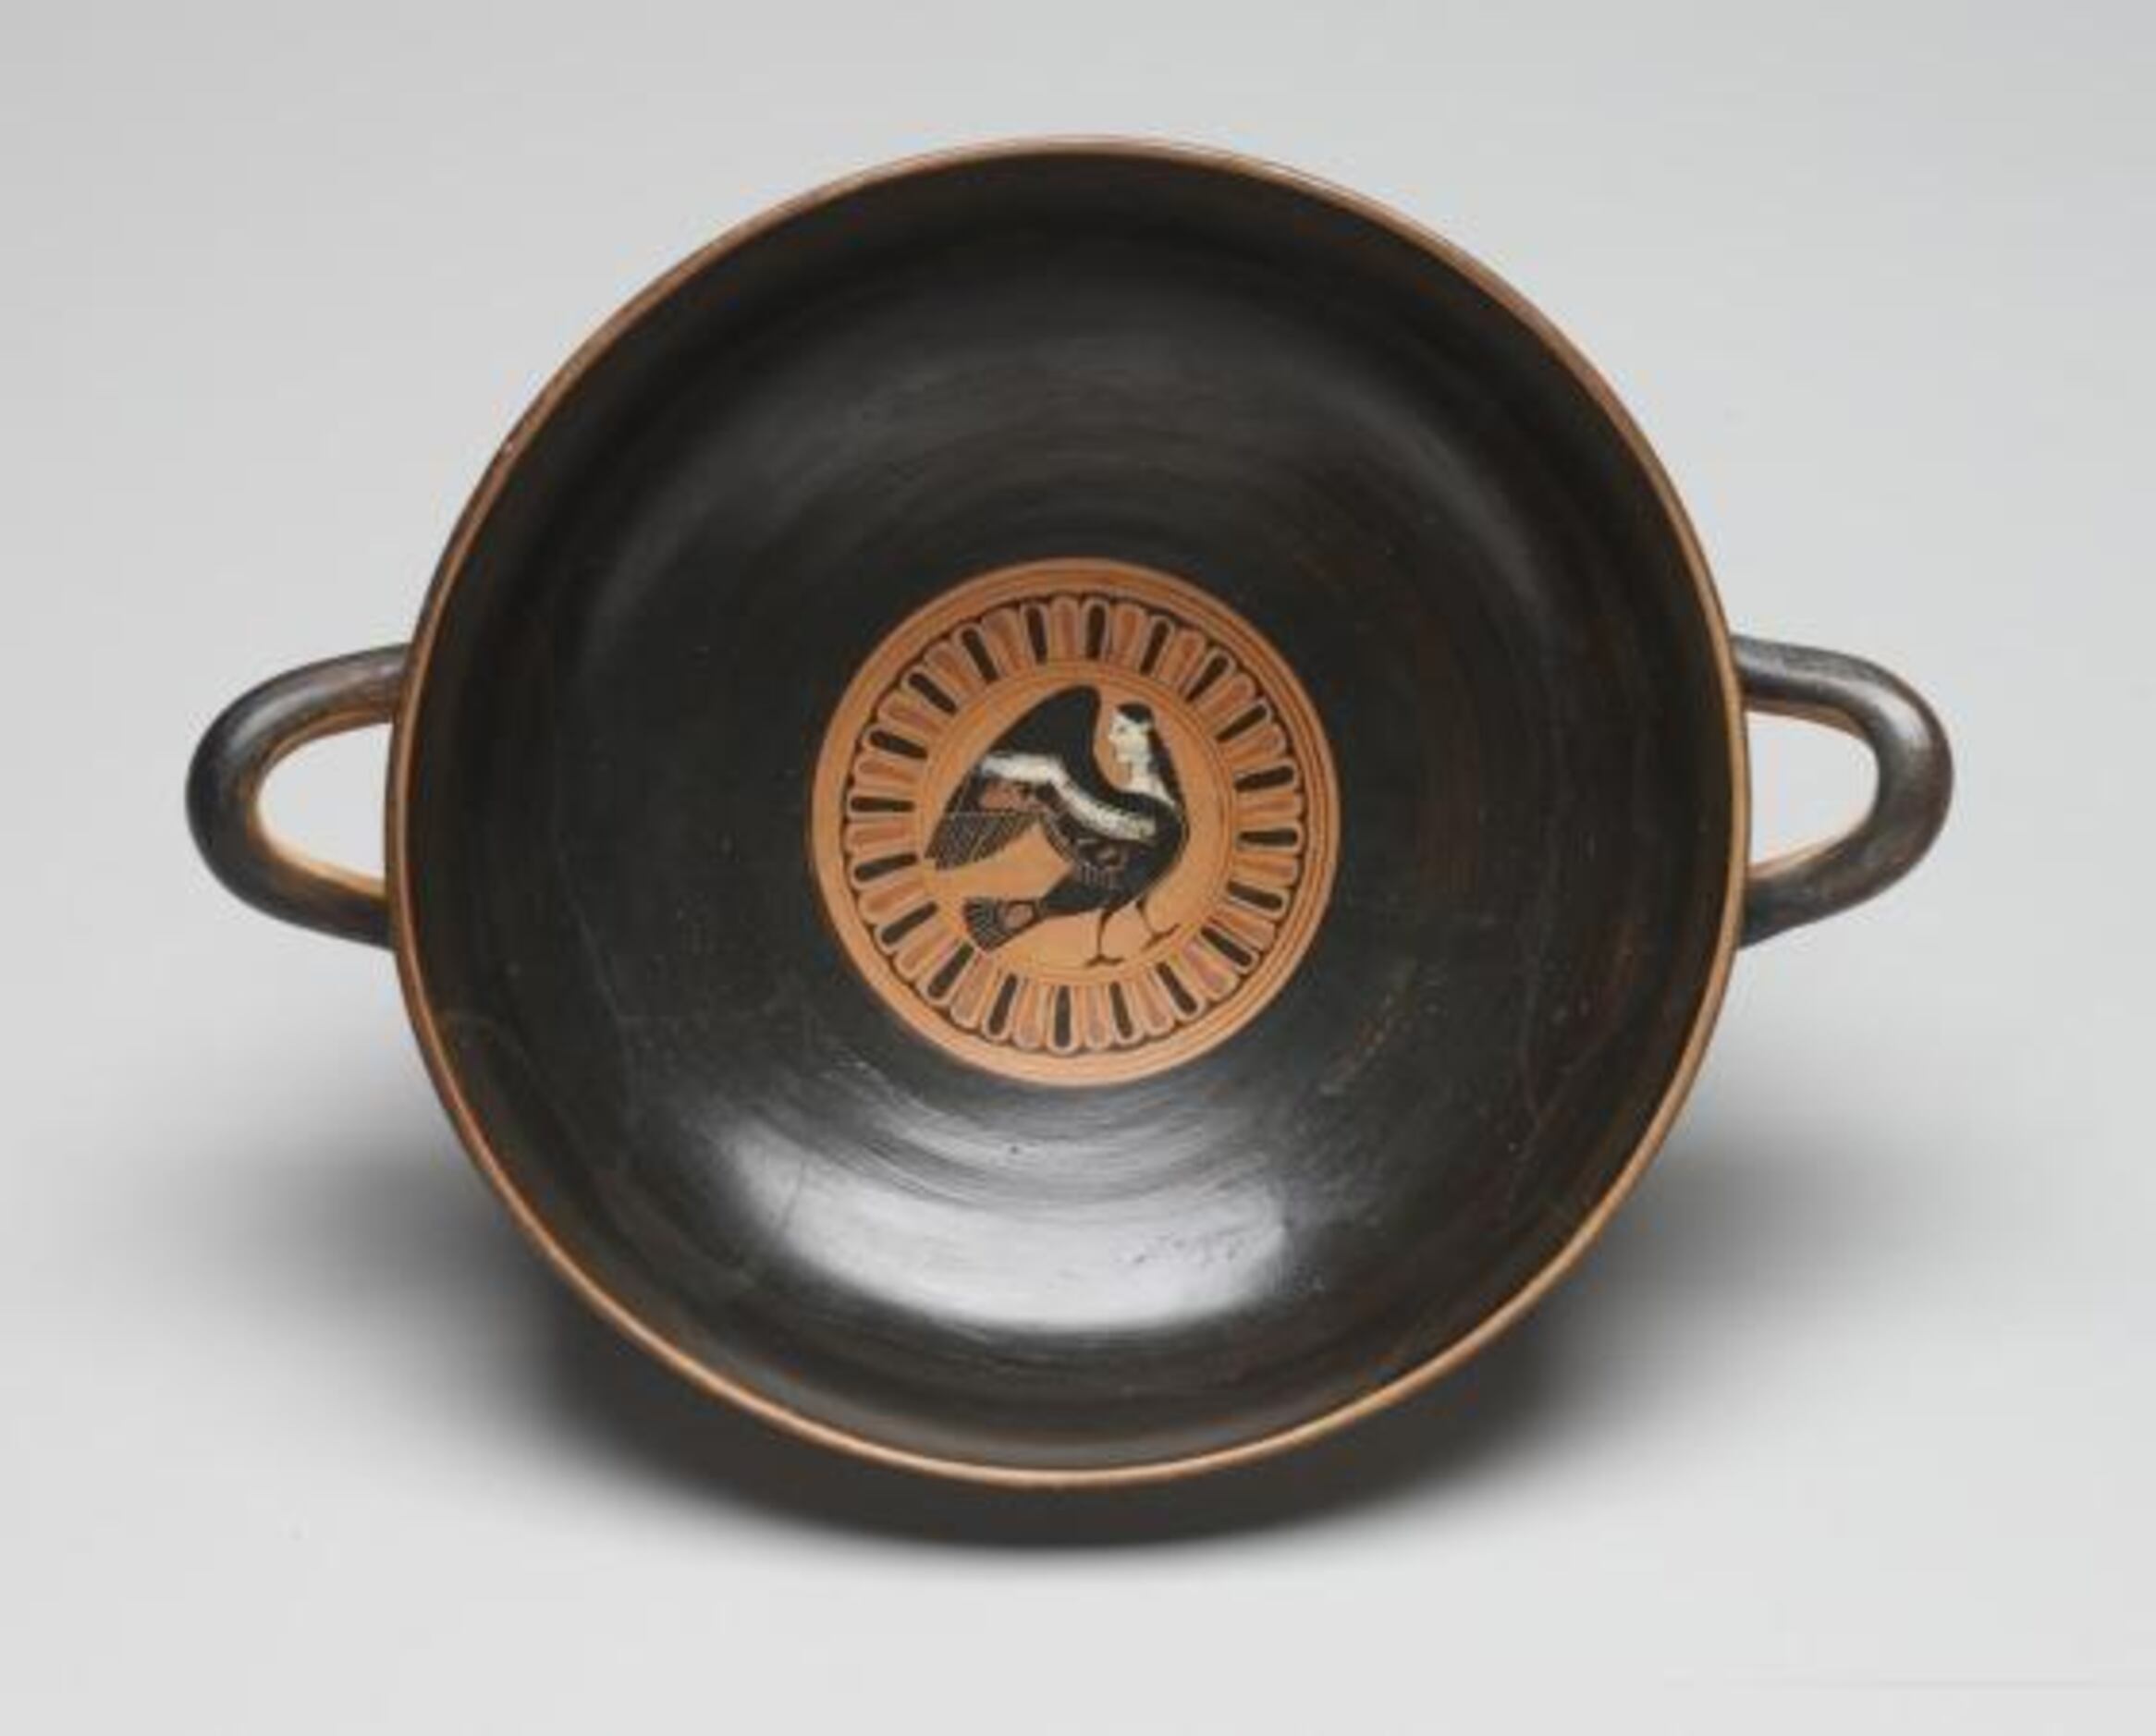 A black-figure kylix from 550 530 B.C. is among three ancient Greek ceramic vessels that...